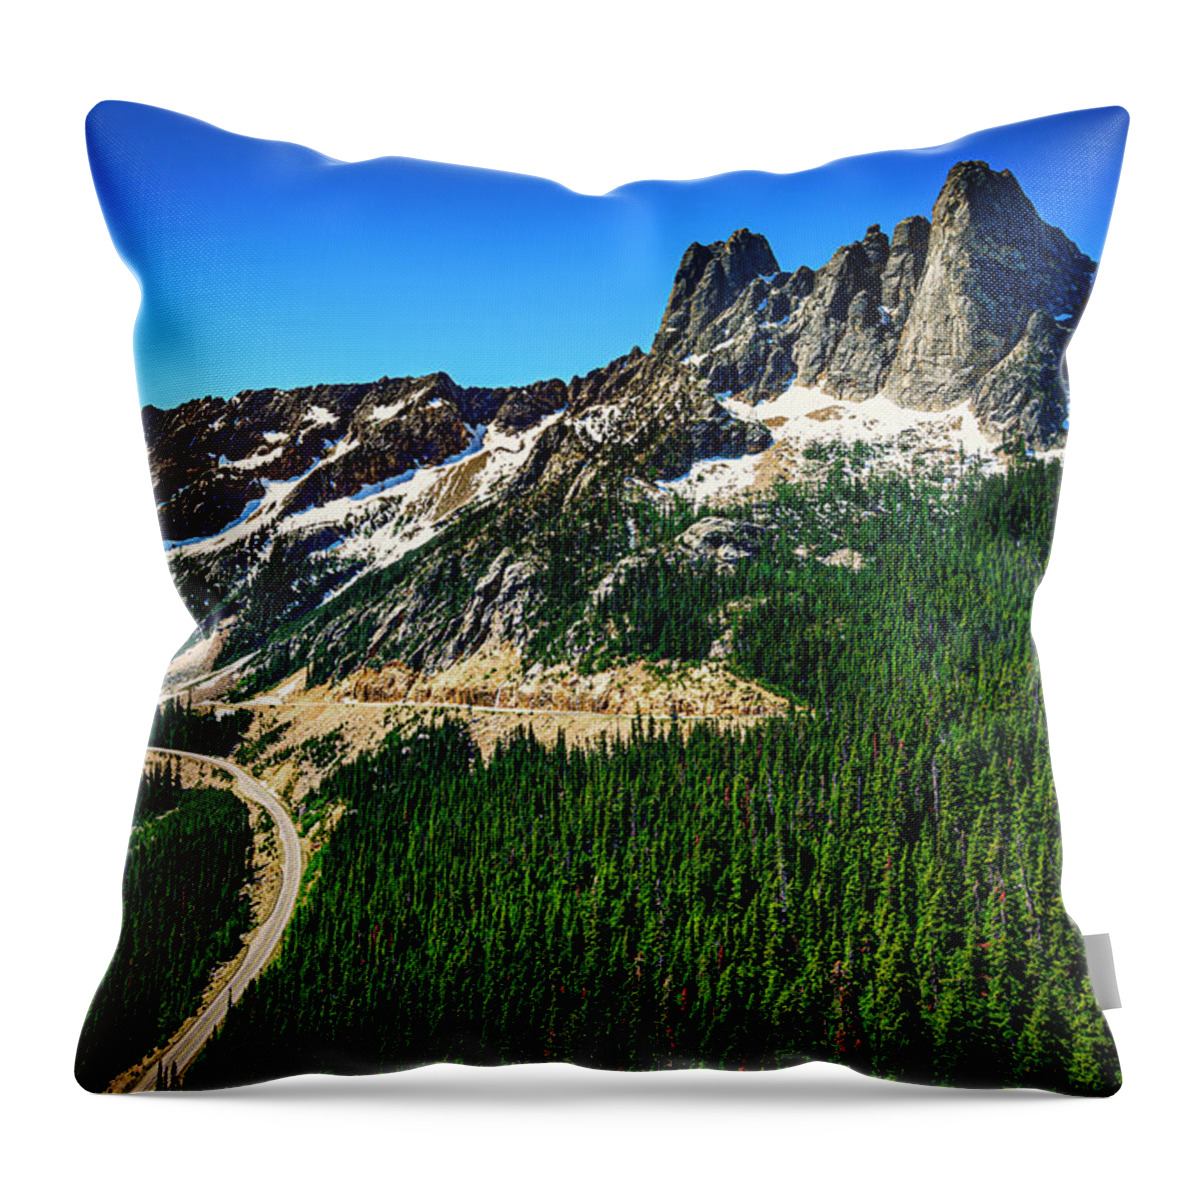 © 2021 Lou Novick All Rights Reversed Throw Pillow featuring the photograph Washintgon Pass by Lou Novick